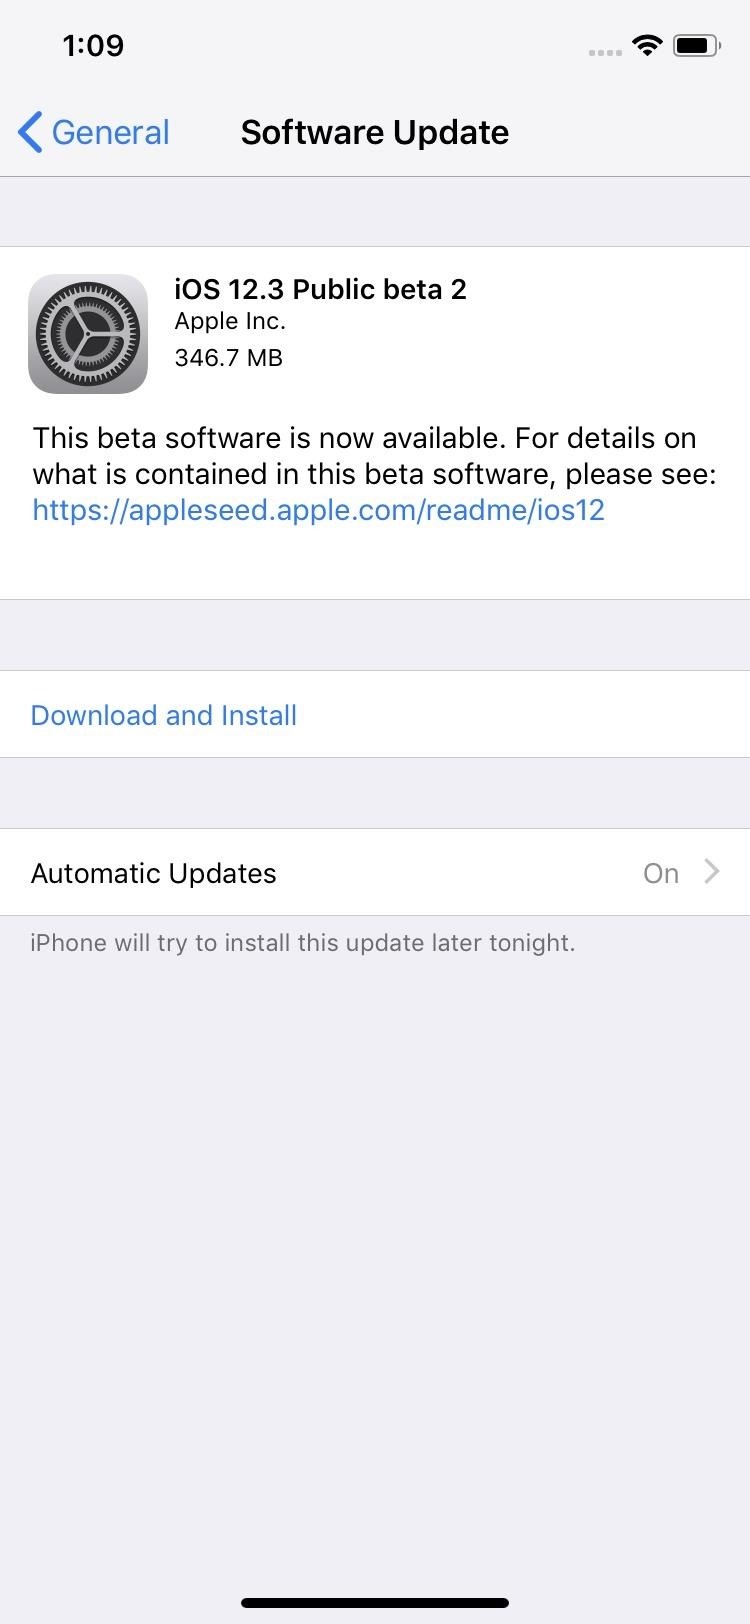 Apple Just Released iOS 12.3 Public Beta 2 for iPhone, Features Small Updates to Wallet & Date/Time